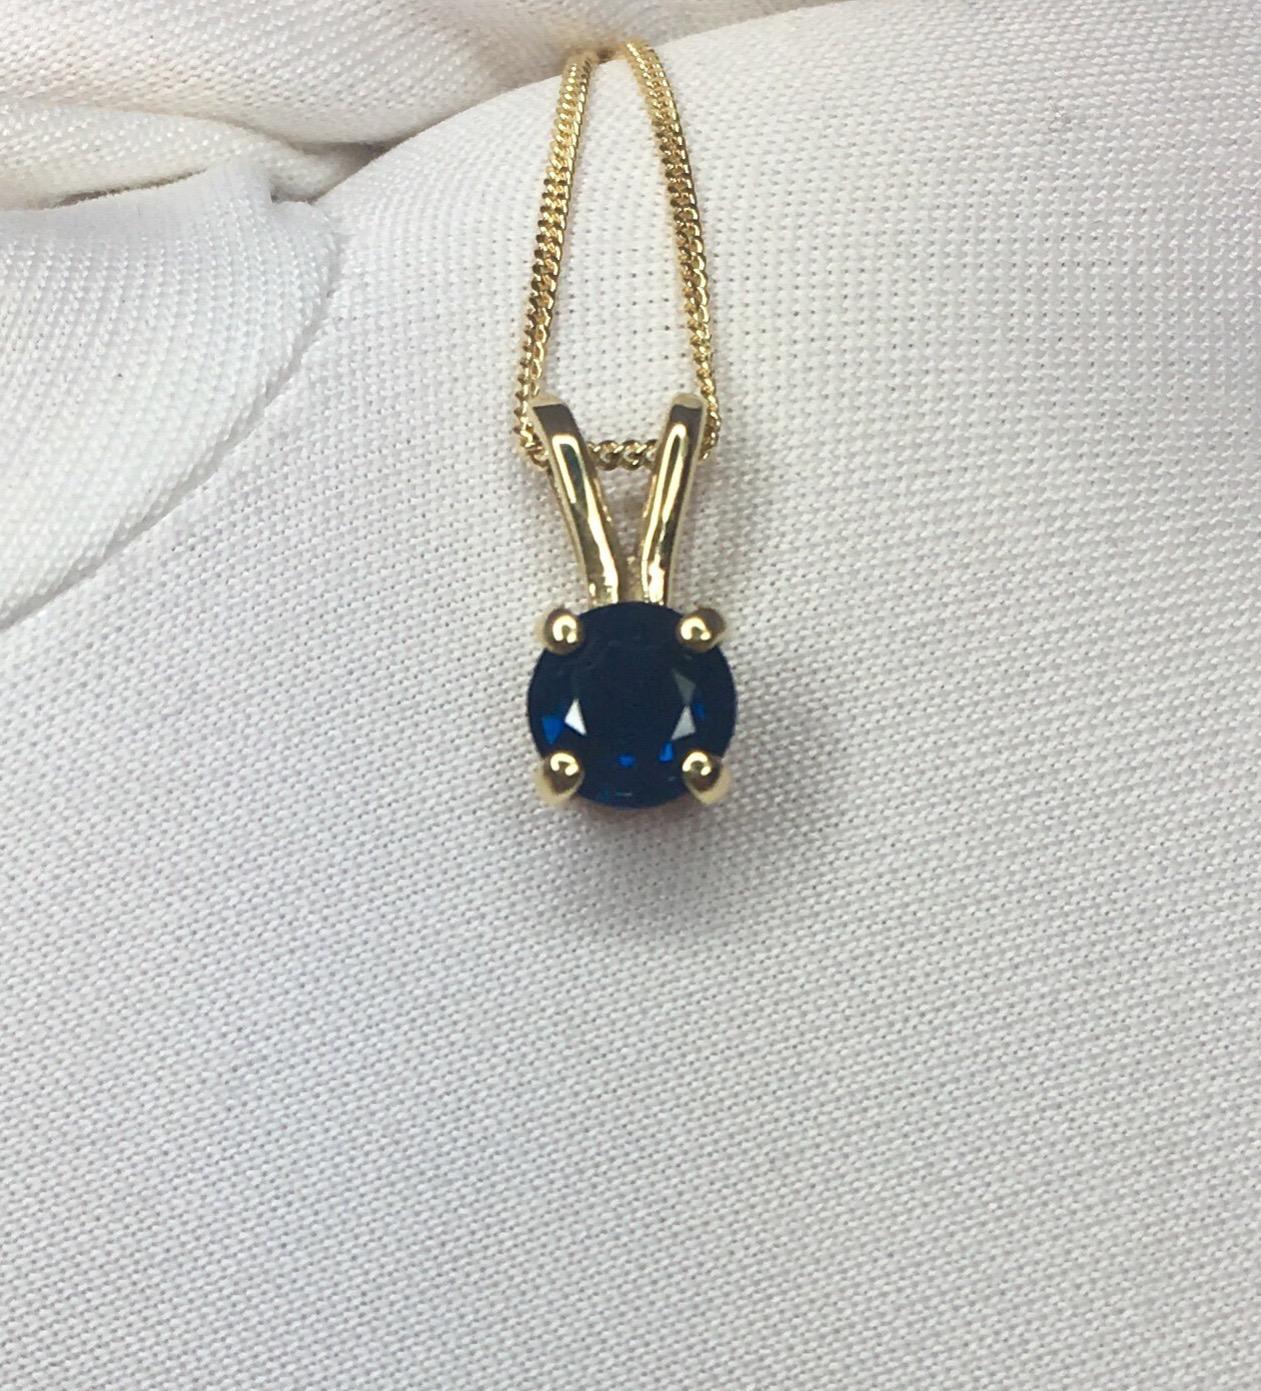 Natural deep blue sapphire pendant.
Beautiful round cut Sapphire. Set in a fine, highly polished 18k yellow gold pendant.

0.57 carat stone with a stunning deep blue colour and good clarity. Some inclusions visible when looking closely but still a